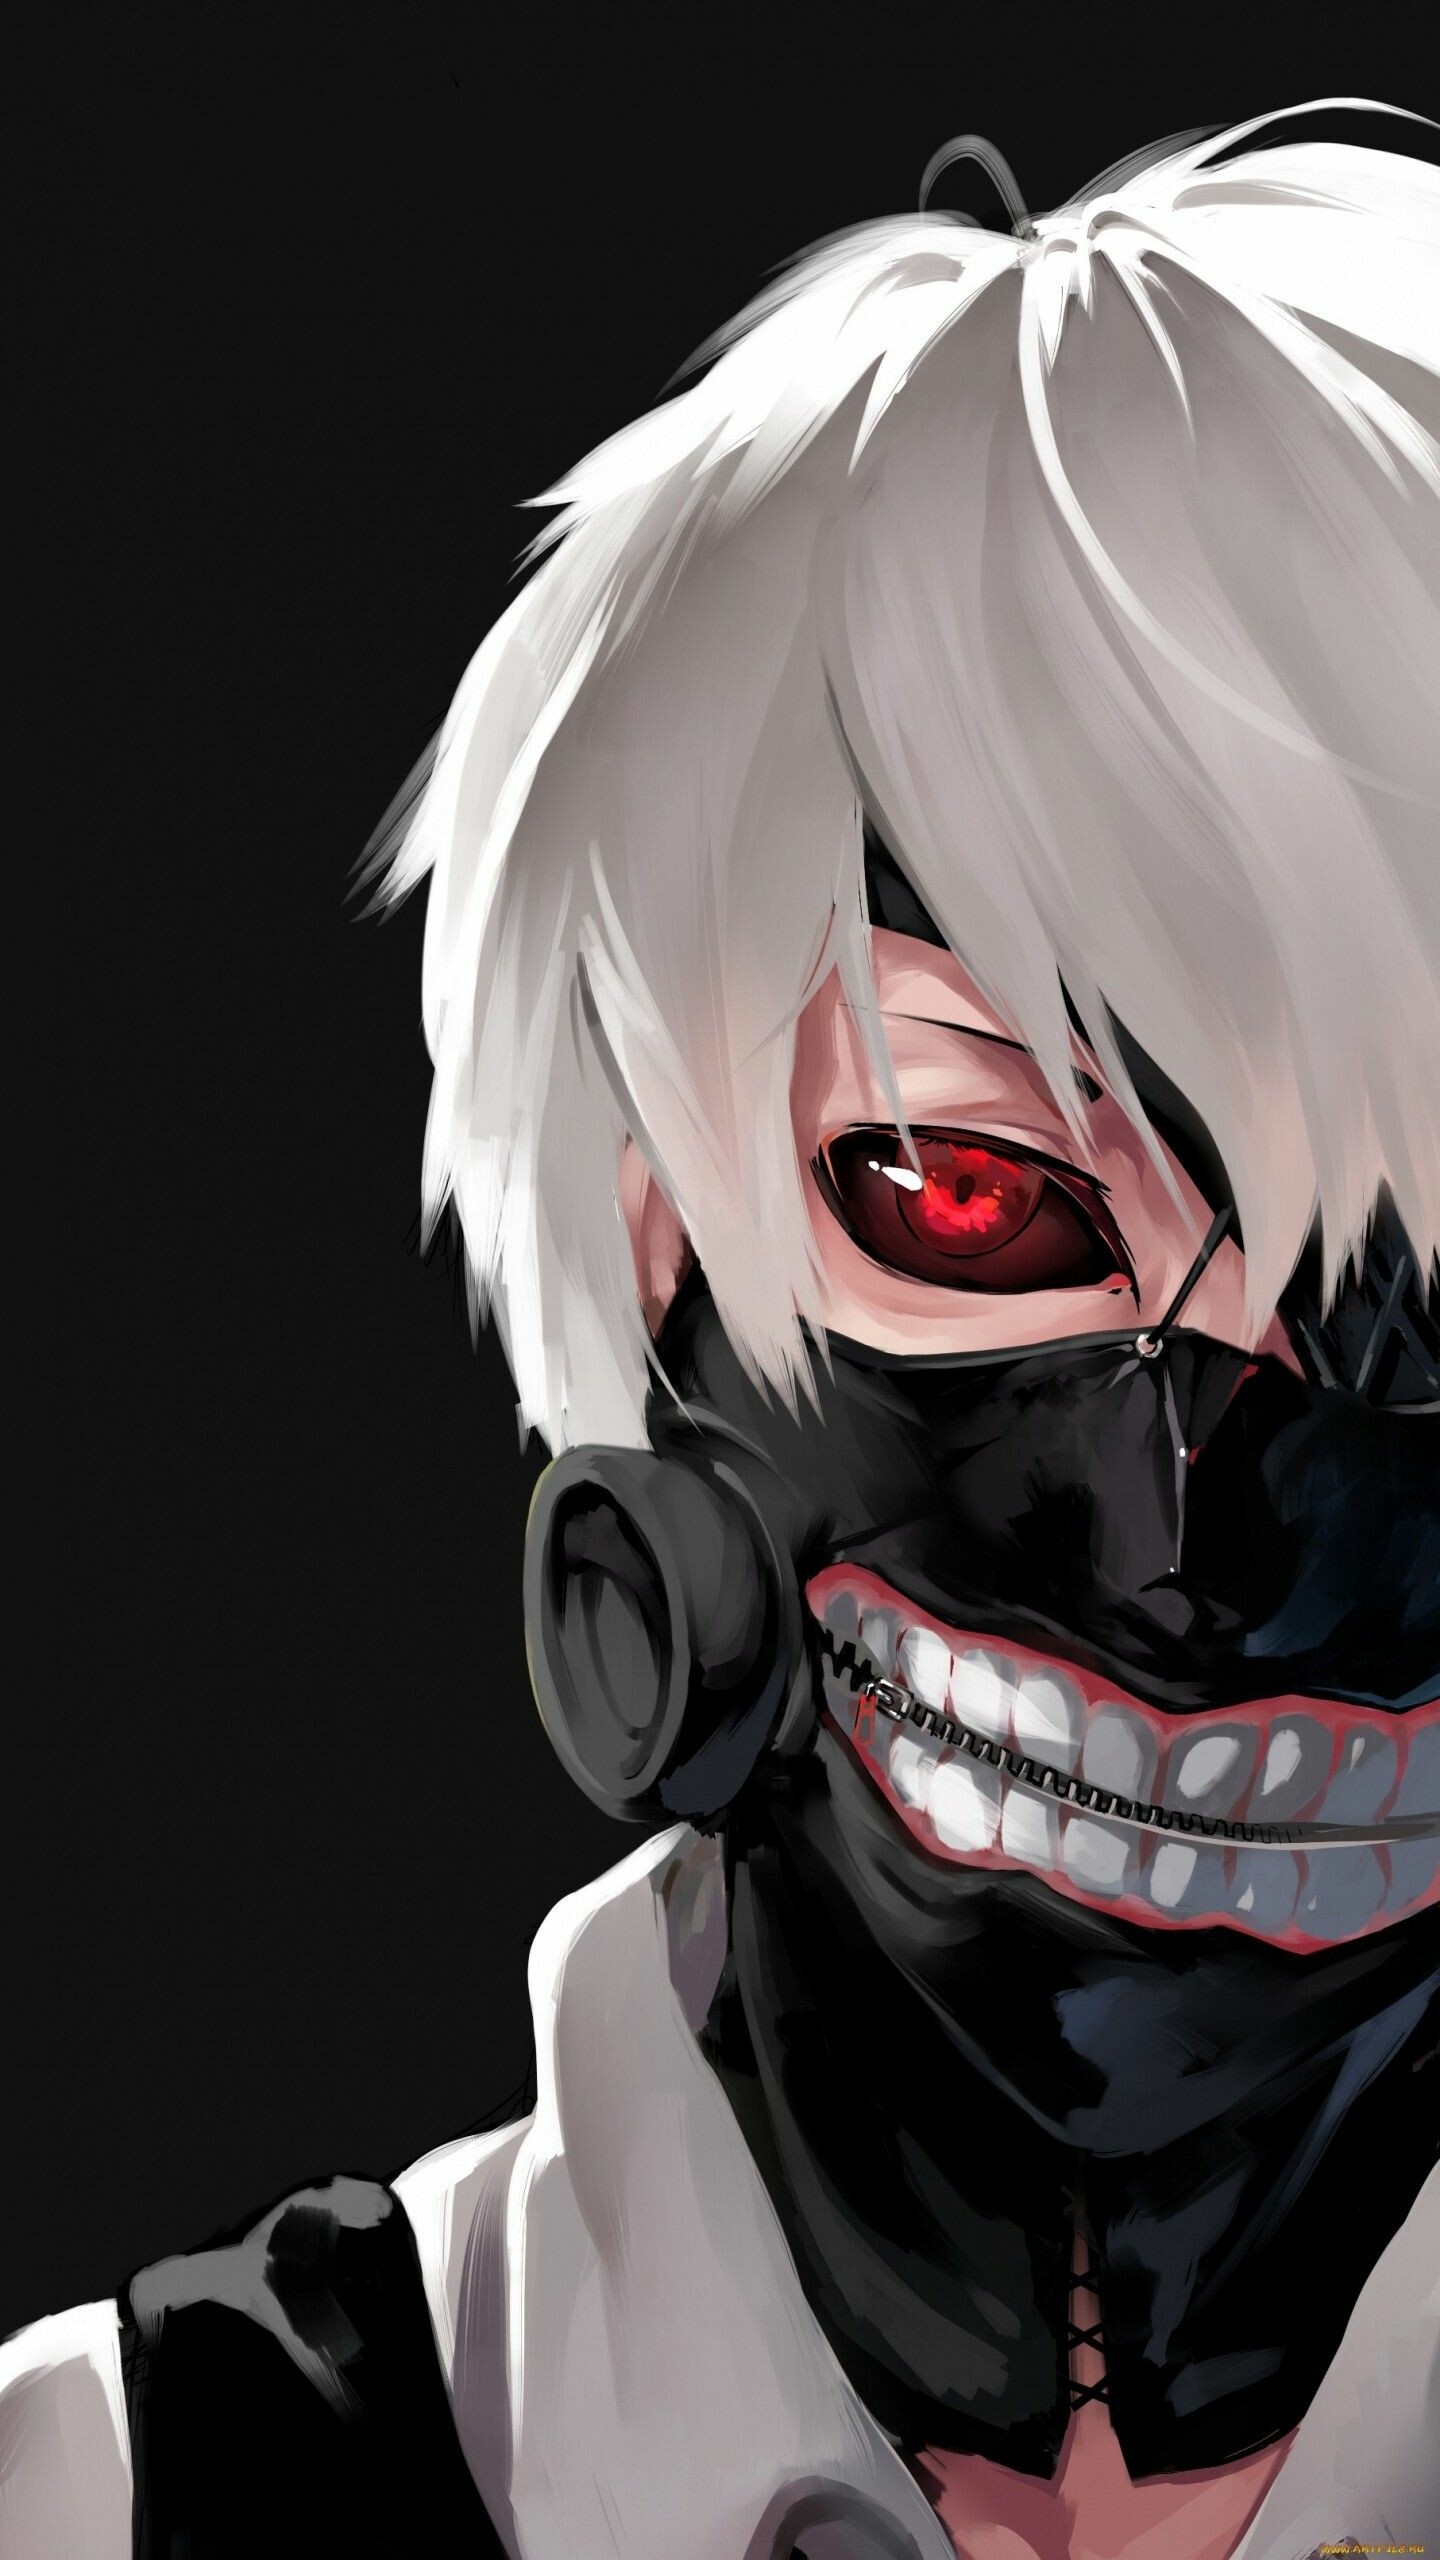 Tokyo Ghoul iPhone Wallpapers  Top Free Tokyo Ghoul iPhone Backgrounds   WallpaperAccess